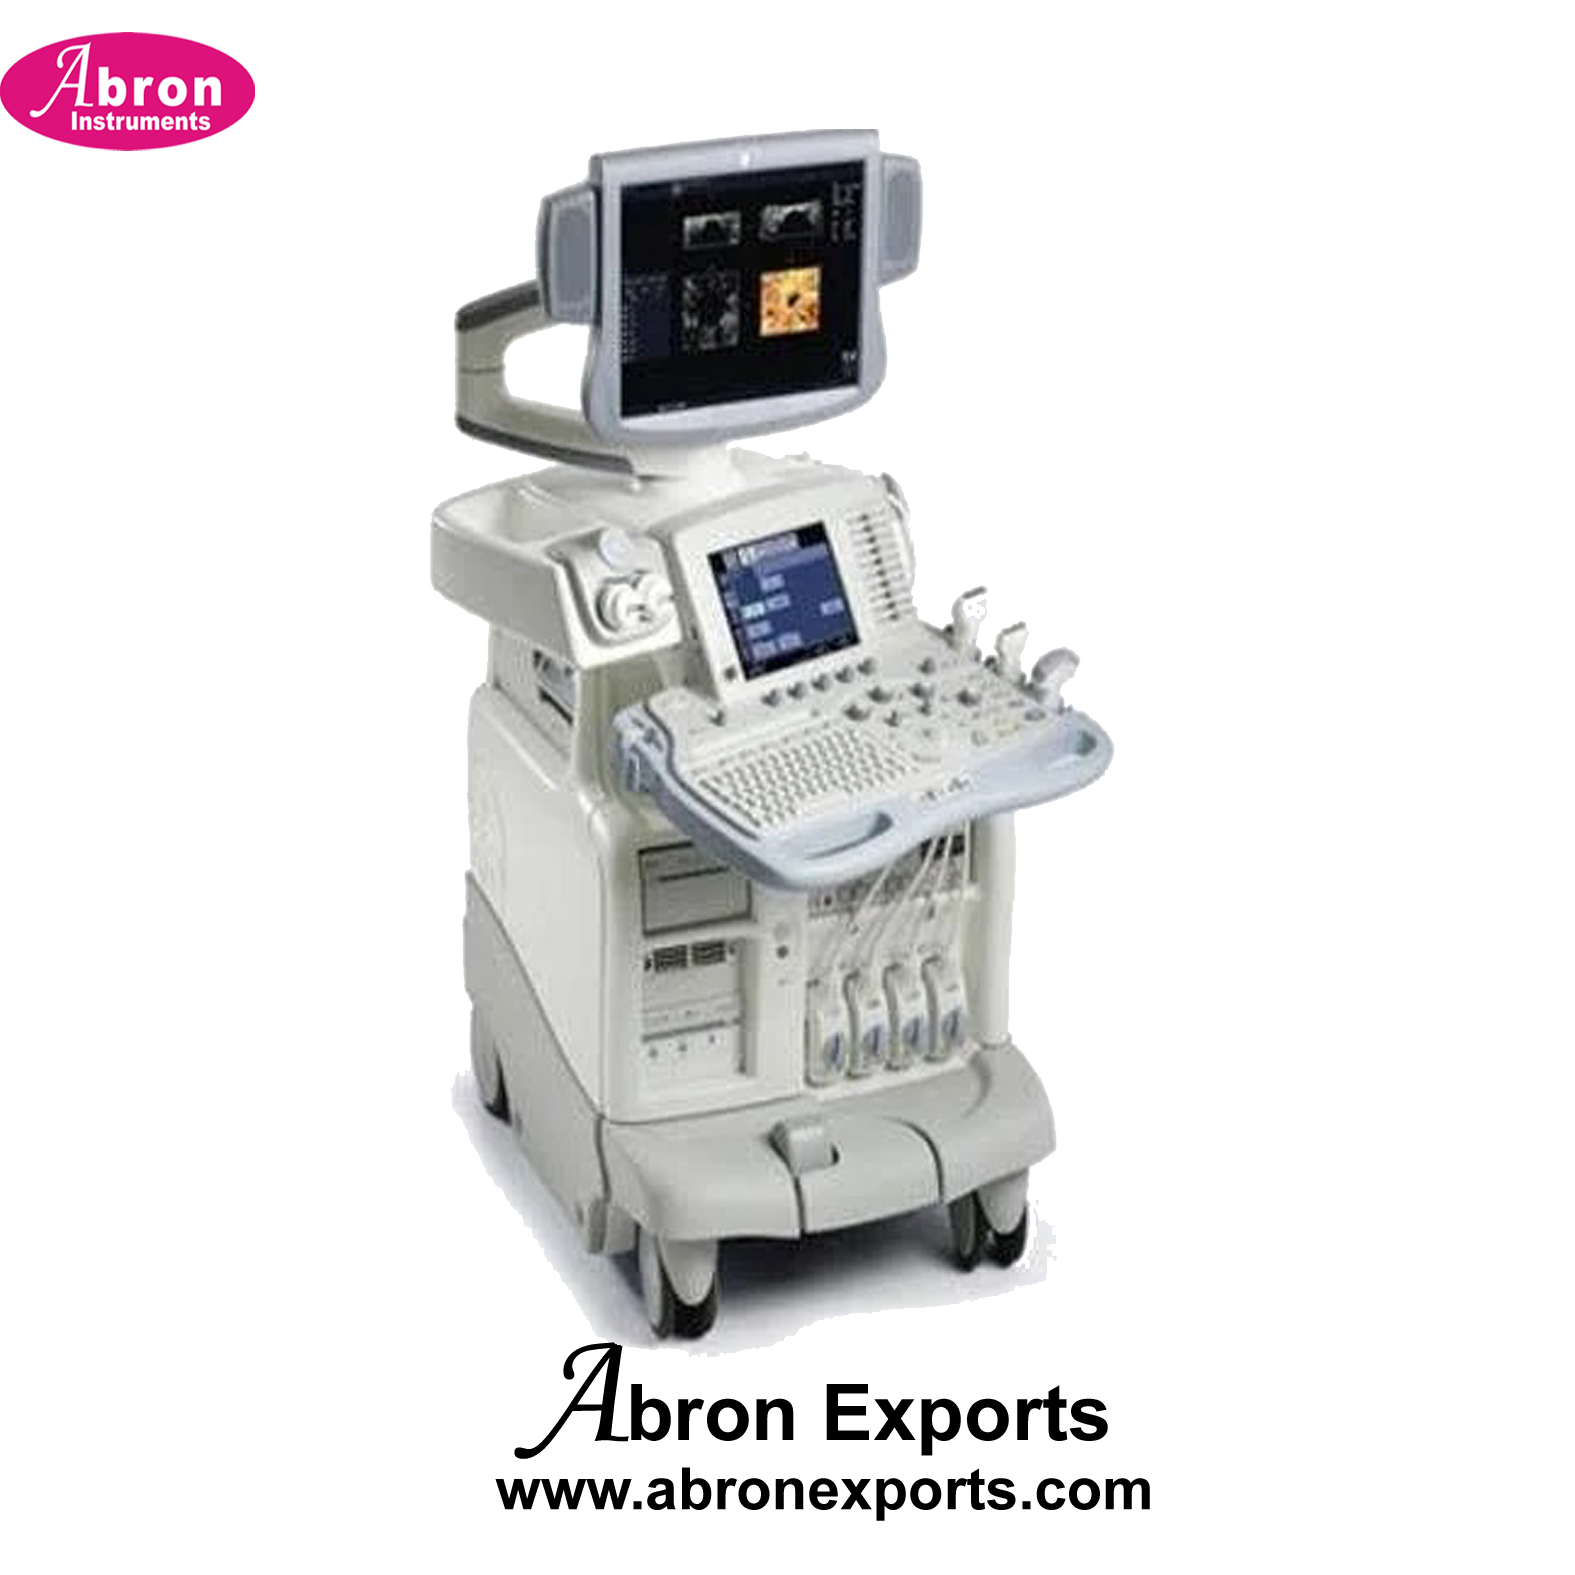 Echocardiography Ultrasound scanner 4D Cadiac colour Sonography TEE with trolley Transesophageal Hospital Abron ABM-2505D4T 